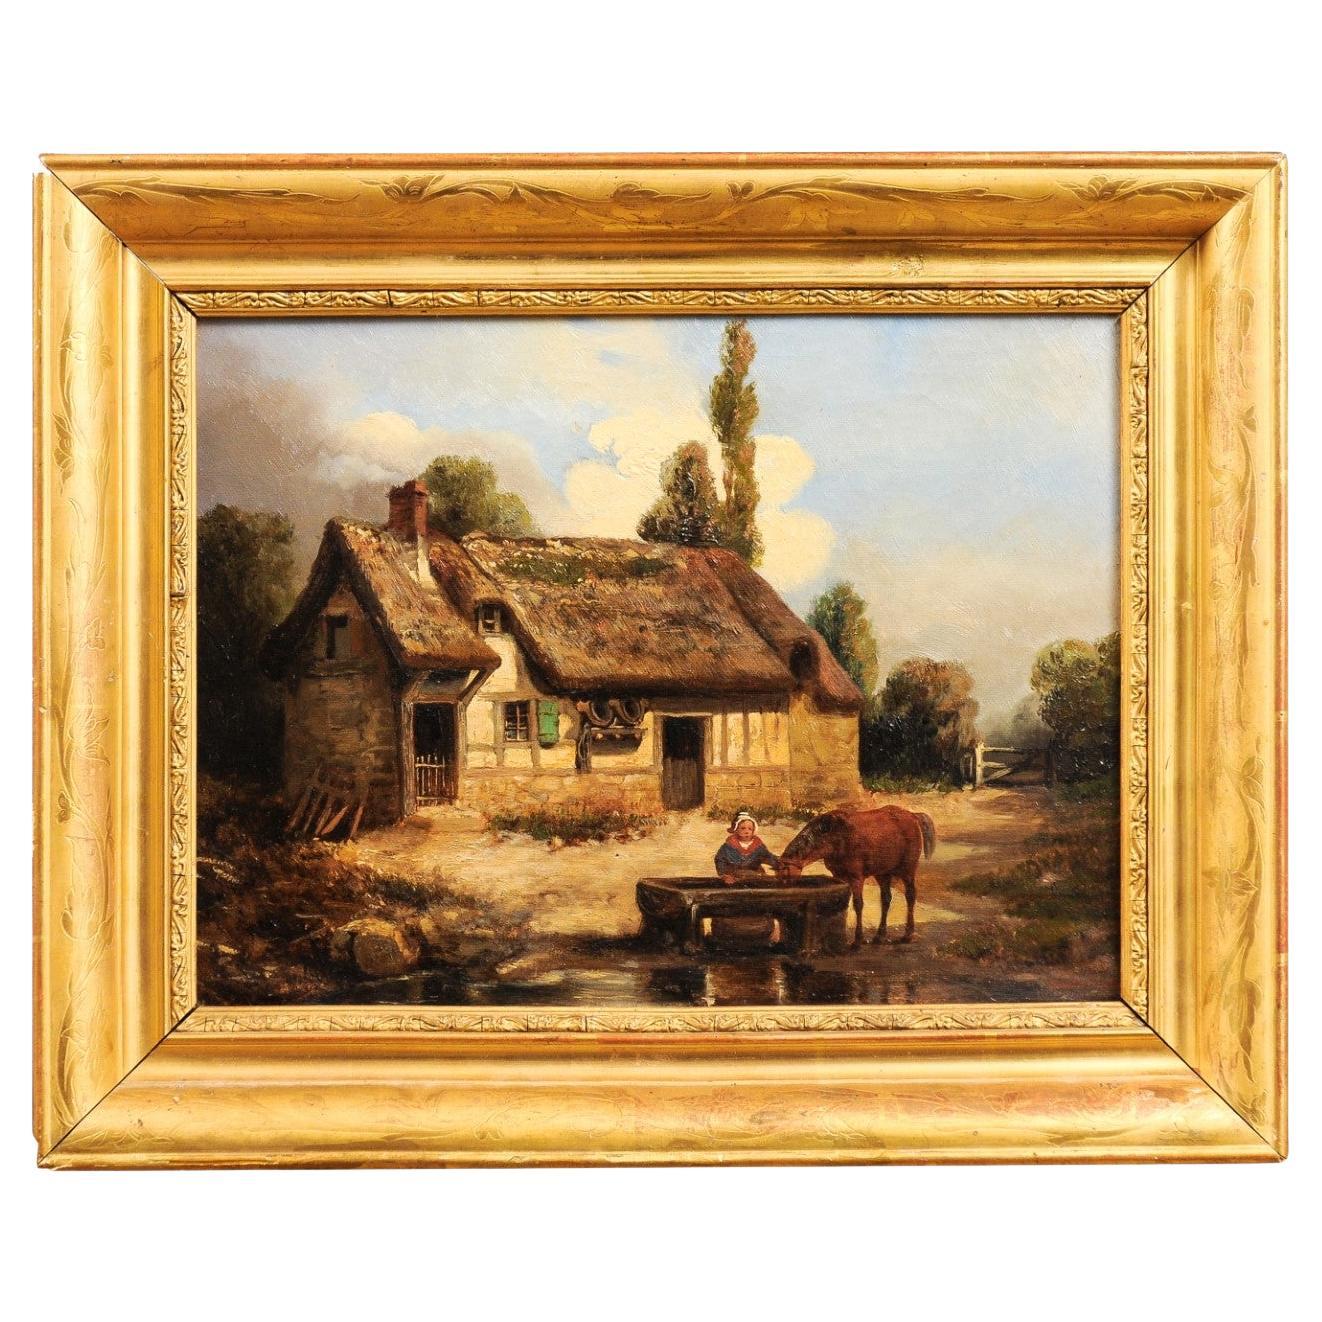 French 19th Century Painting Signed Léon Bertan Depicting a Bucolic Farm Scene For Sale